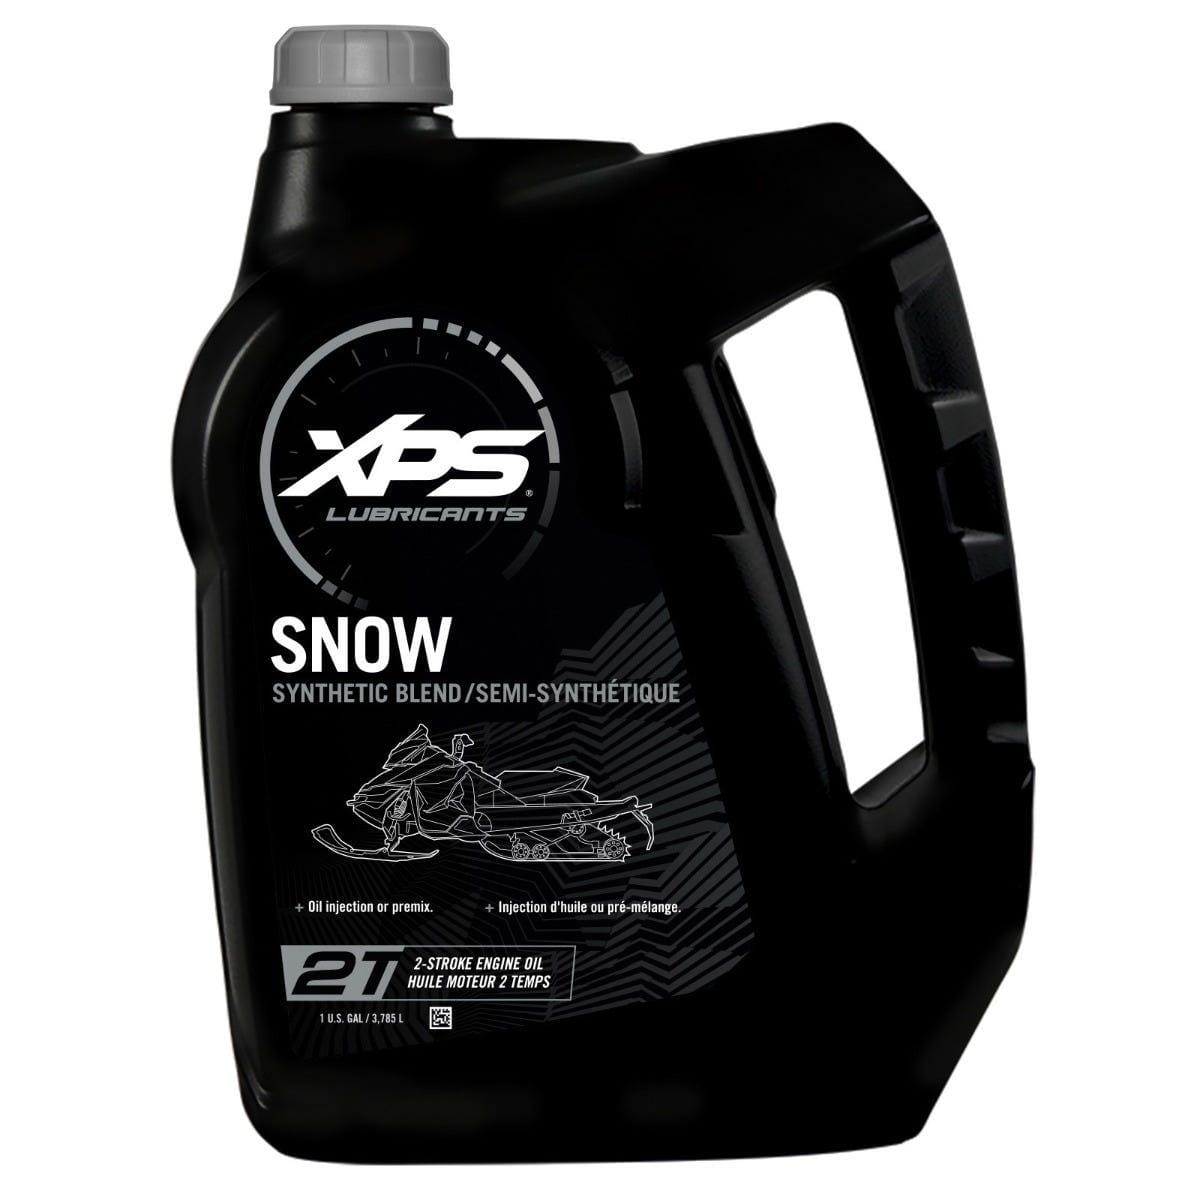 2T Snowmobile Synthetic Blend Oil / 1 US gal.